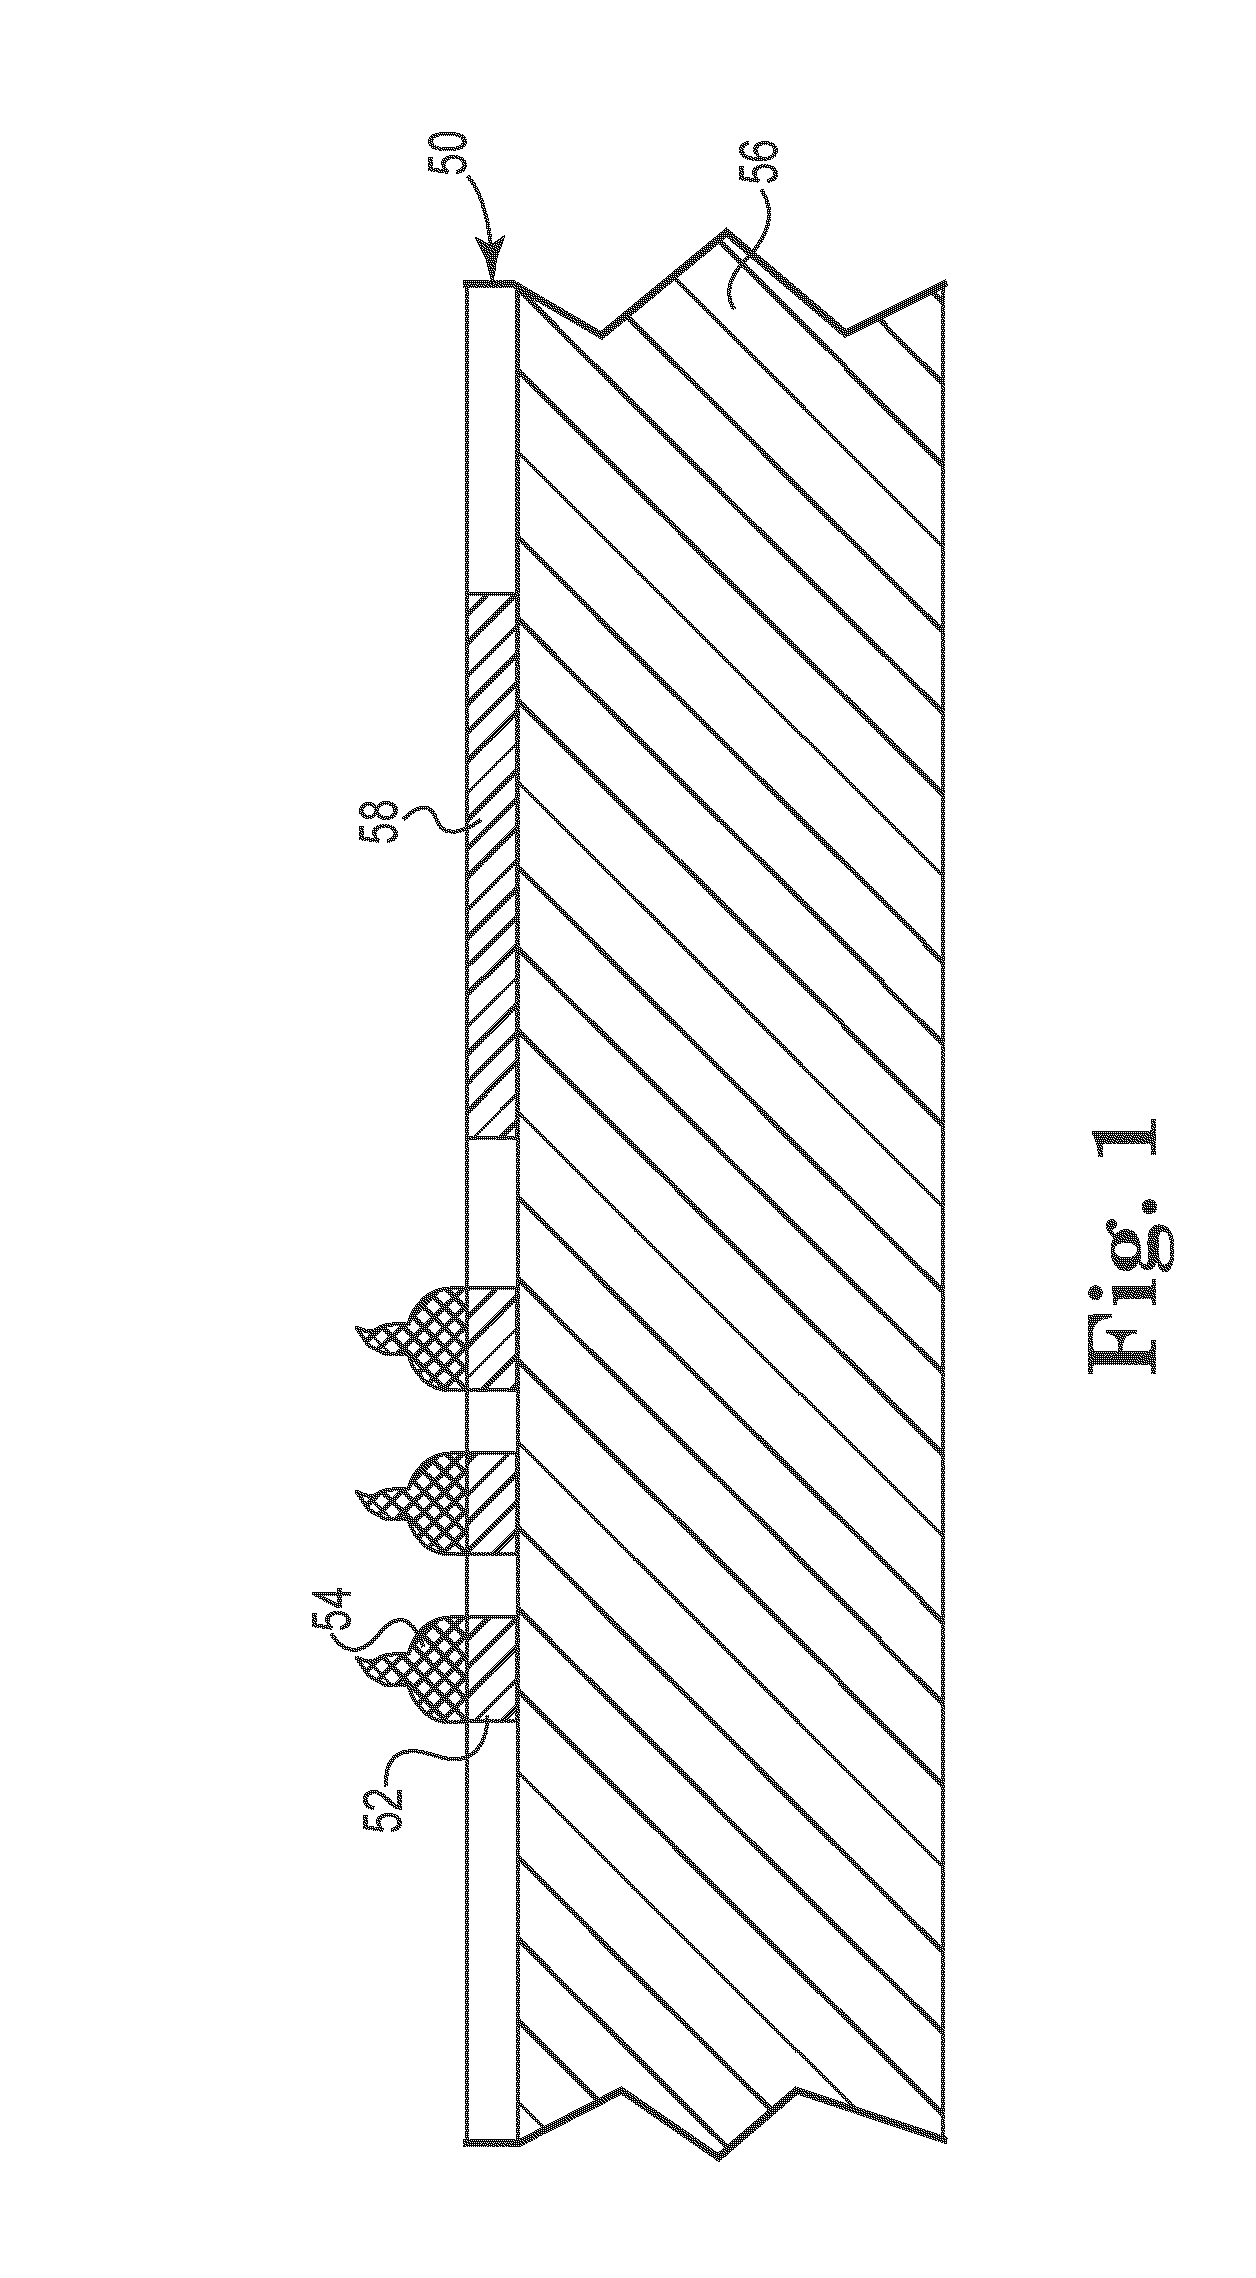 Bumped semiconductor wafer or die level electrical interconnect